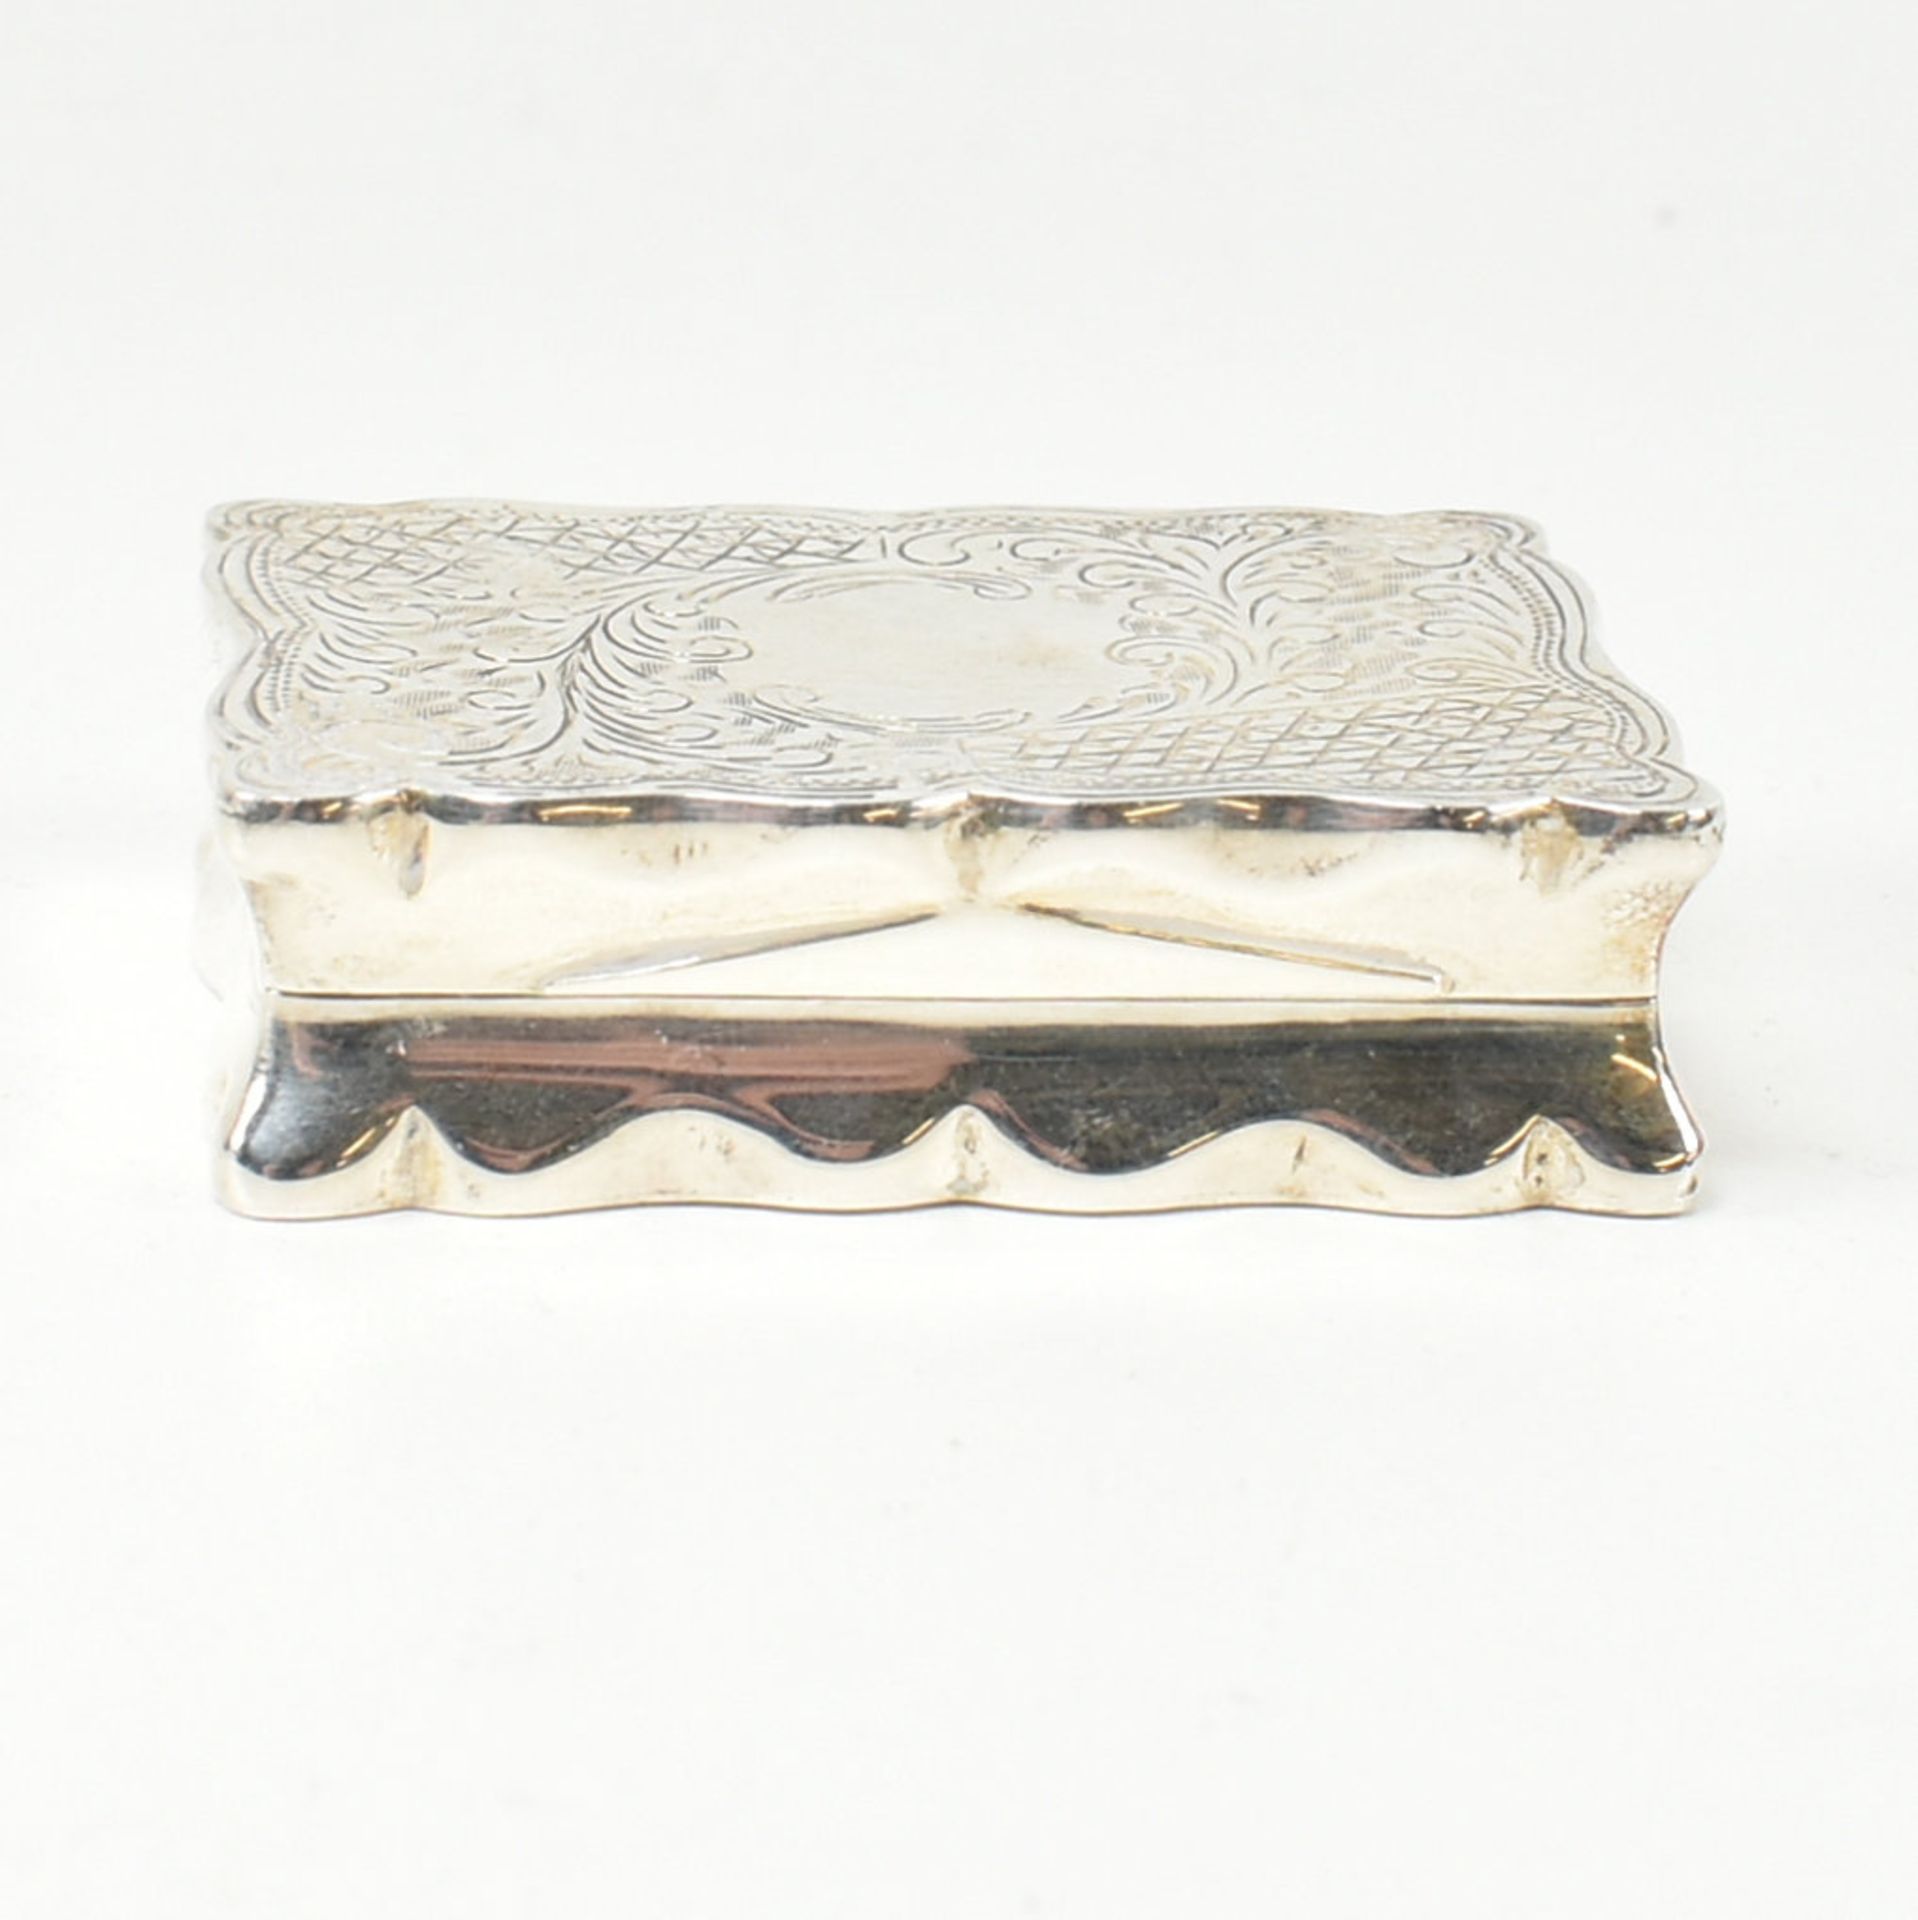 925 STERLING SILVER SNUFF BOX - Image 3 of 6